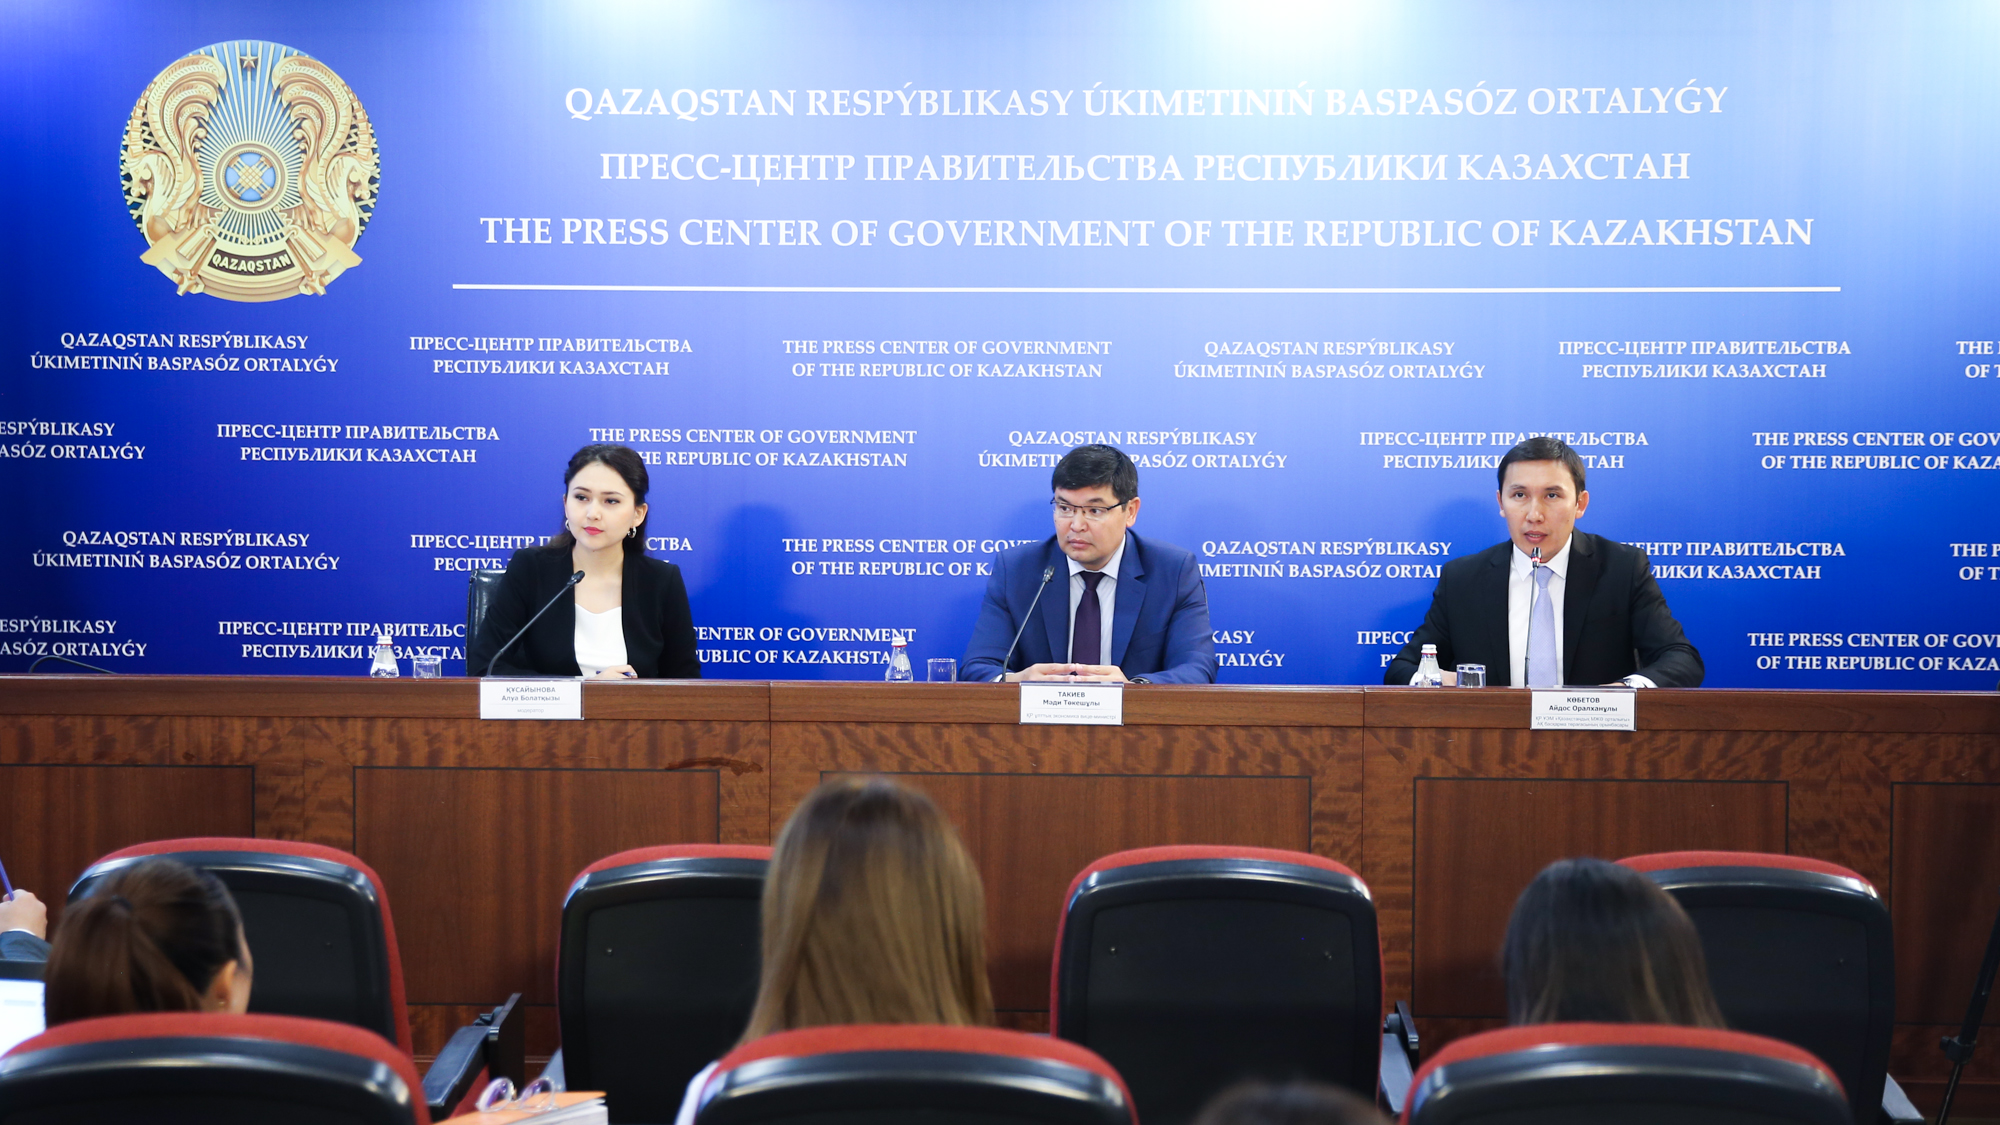 PPP projects with minimal reimbursement from budget are the priority — Ministry of National Economy